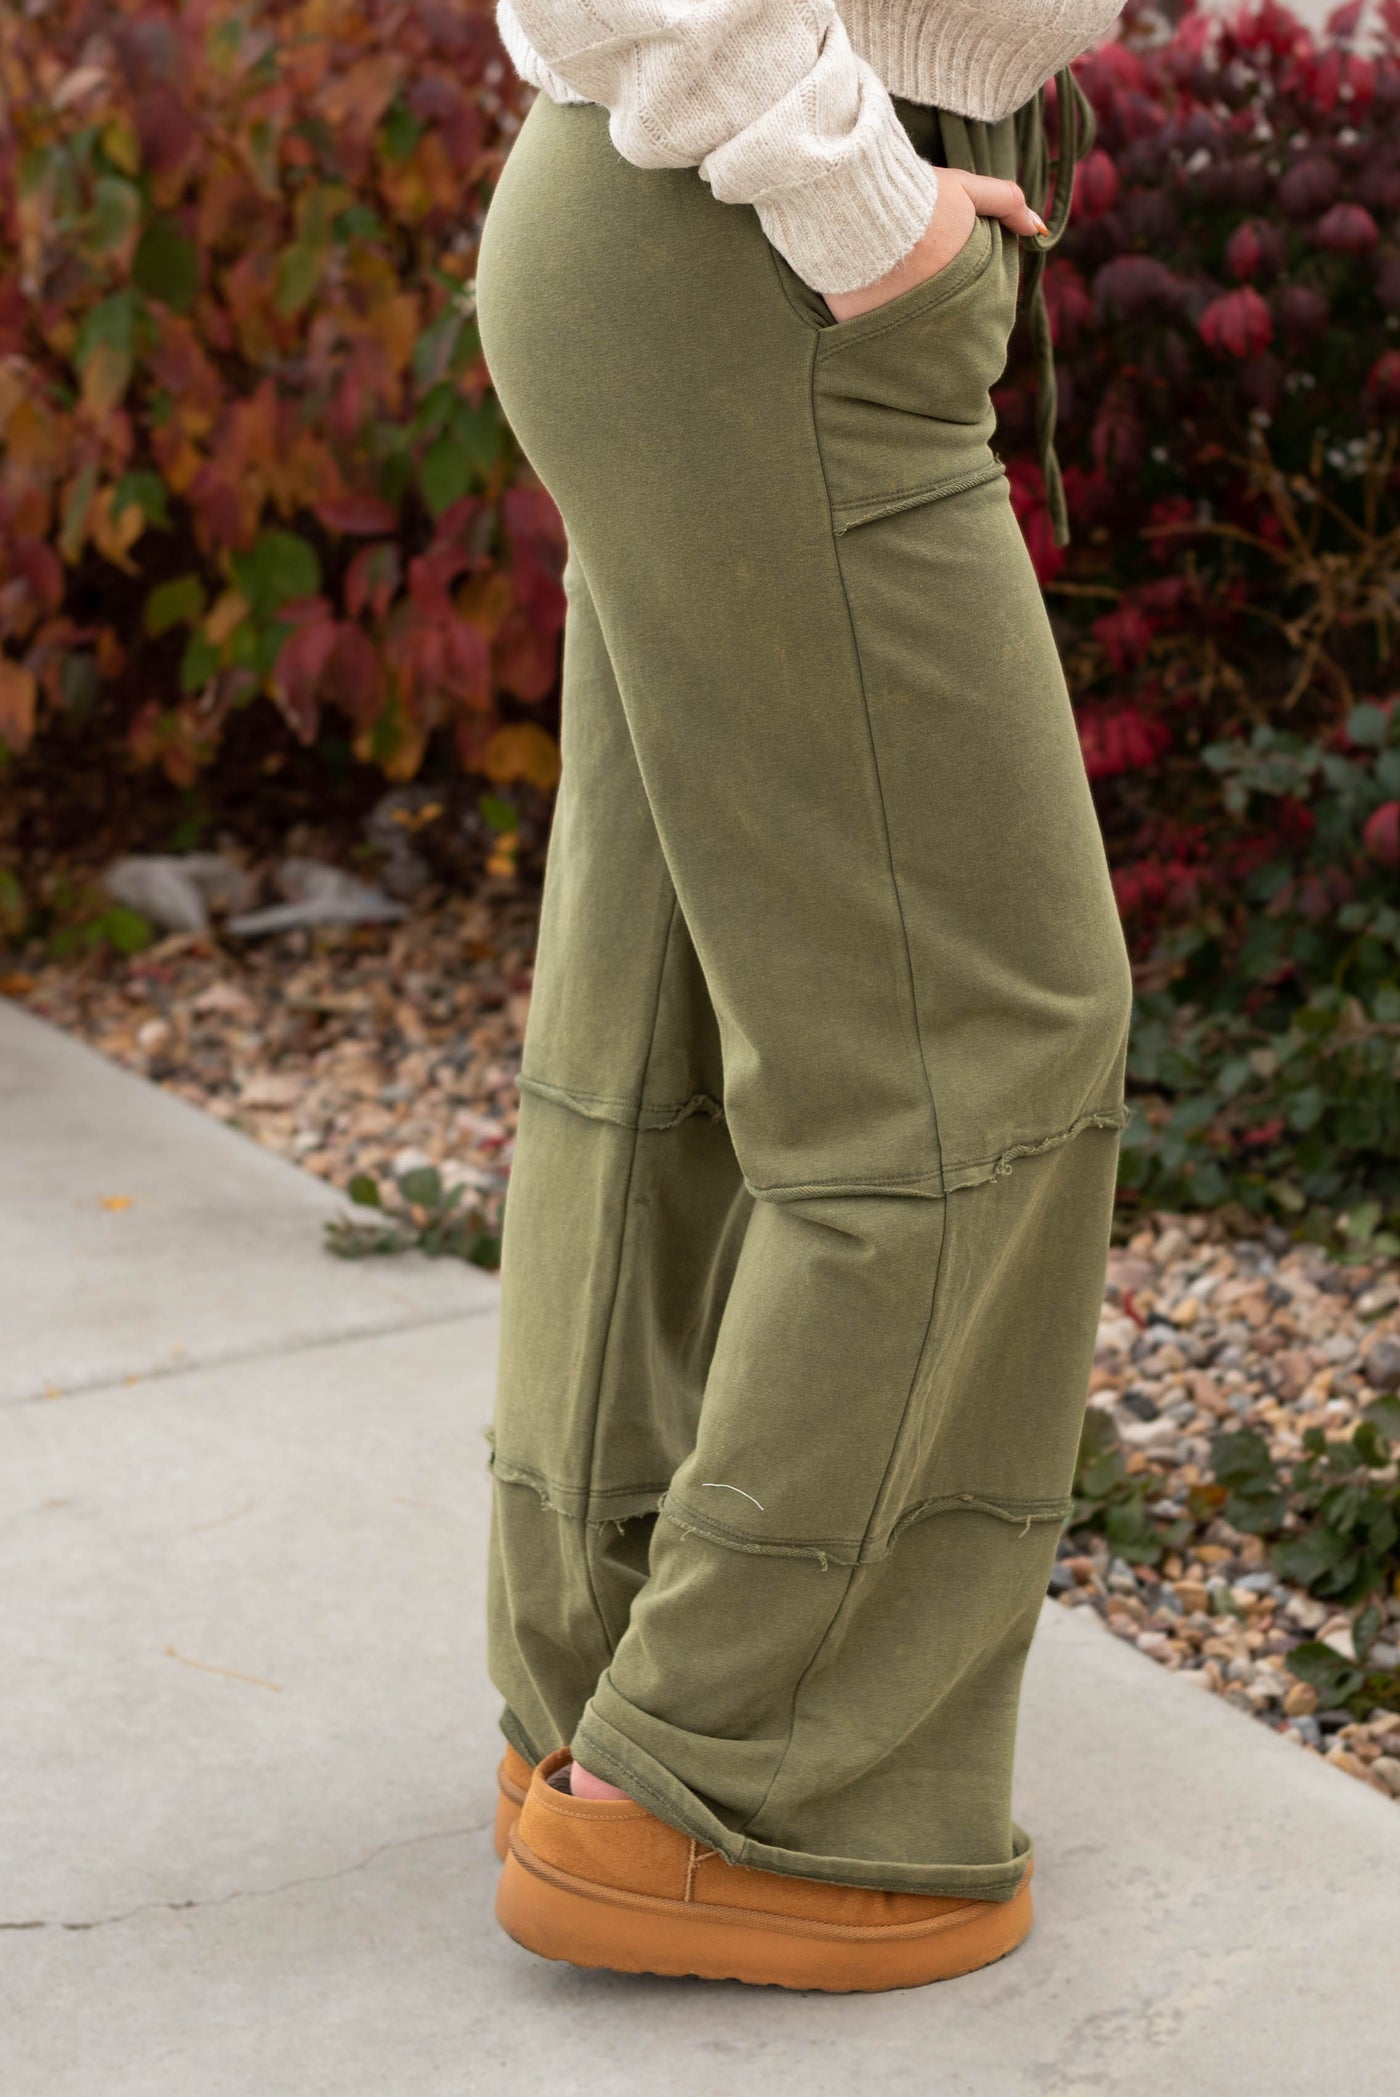 Side view of the olive pants